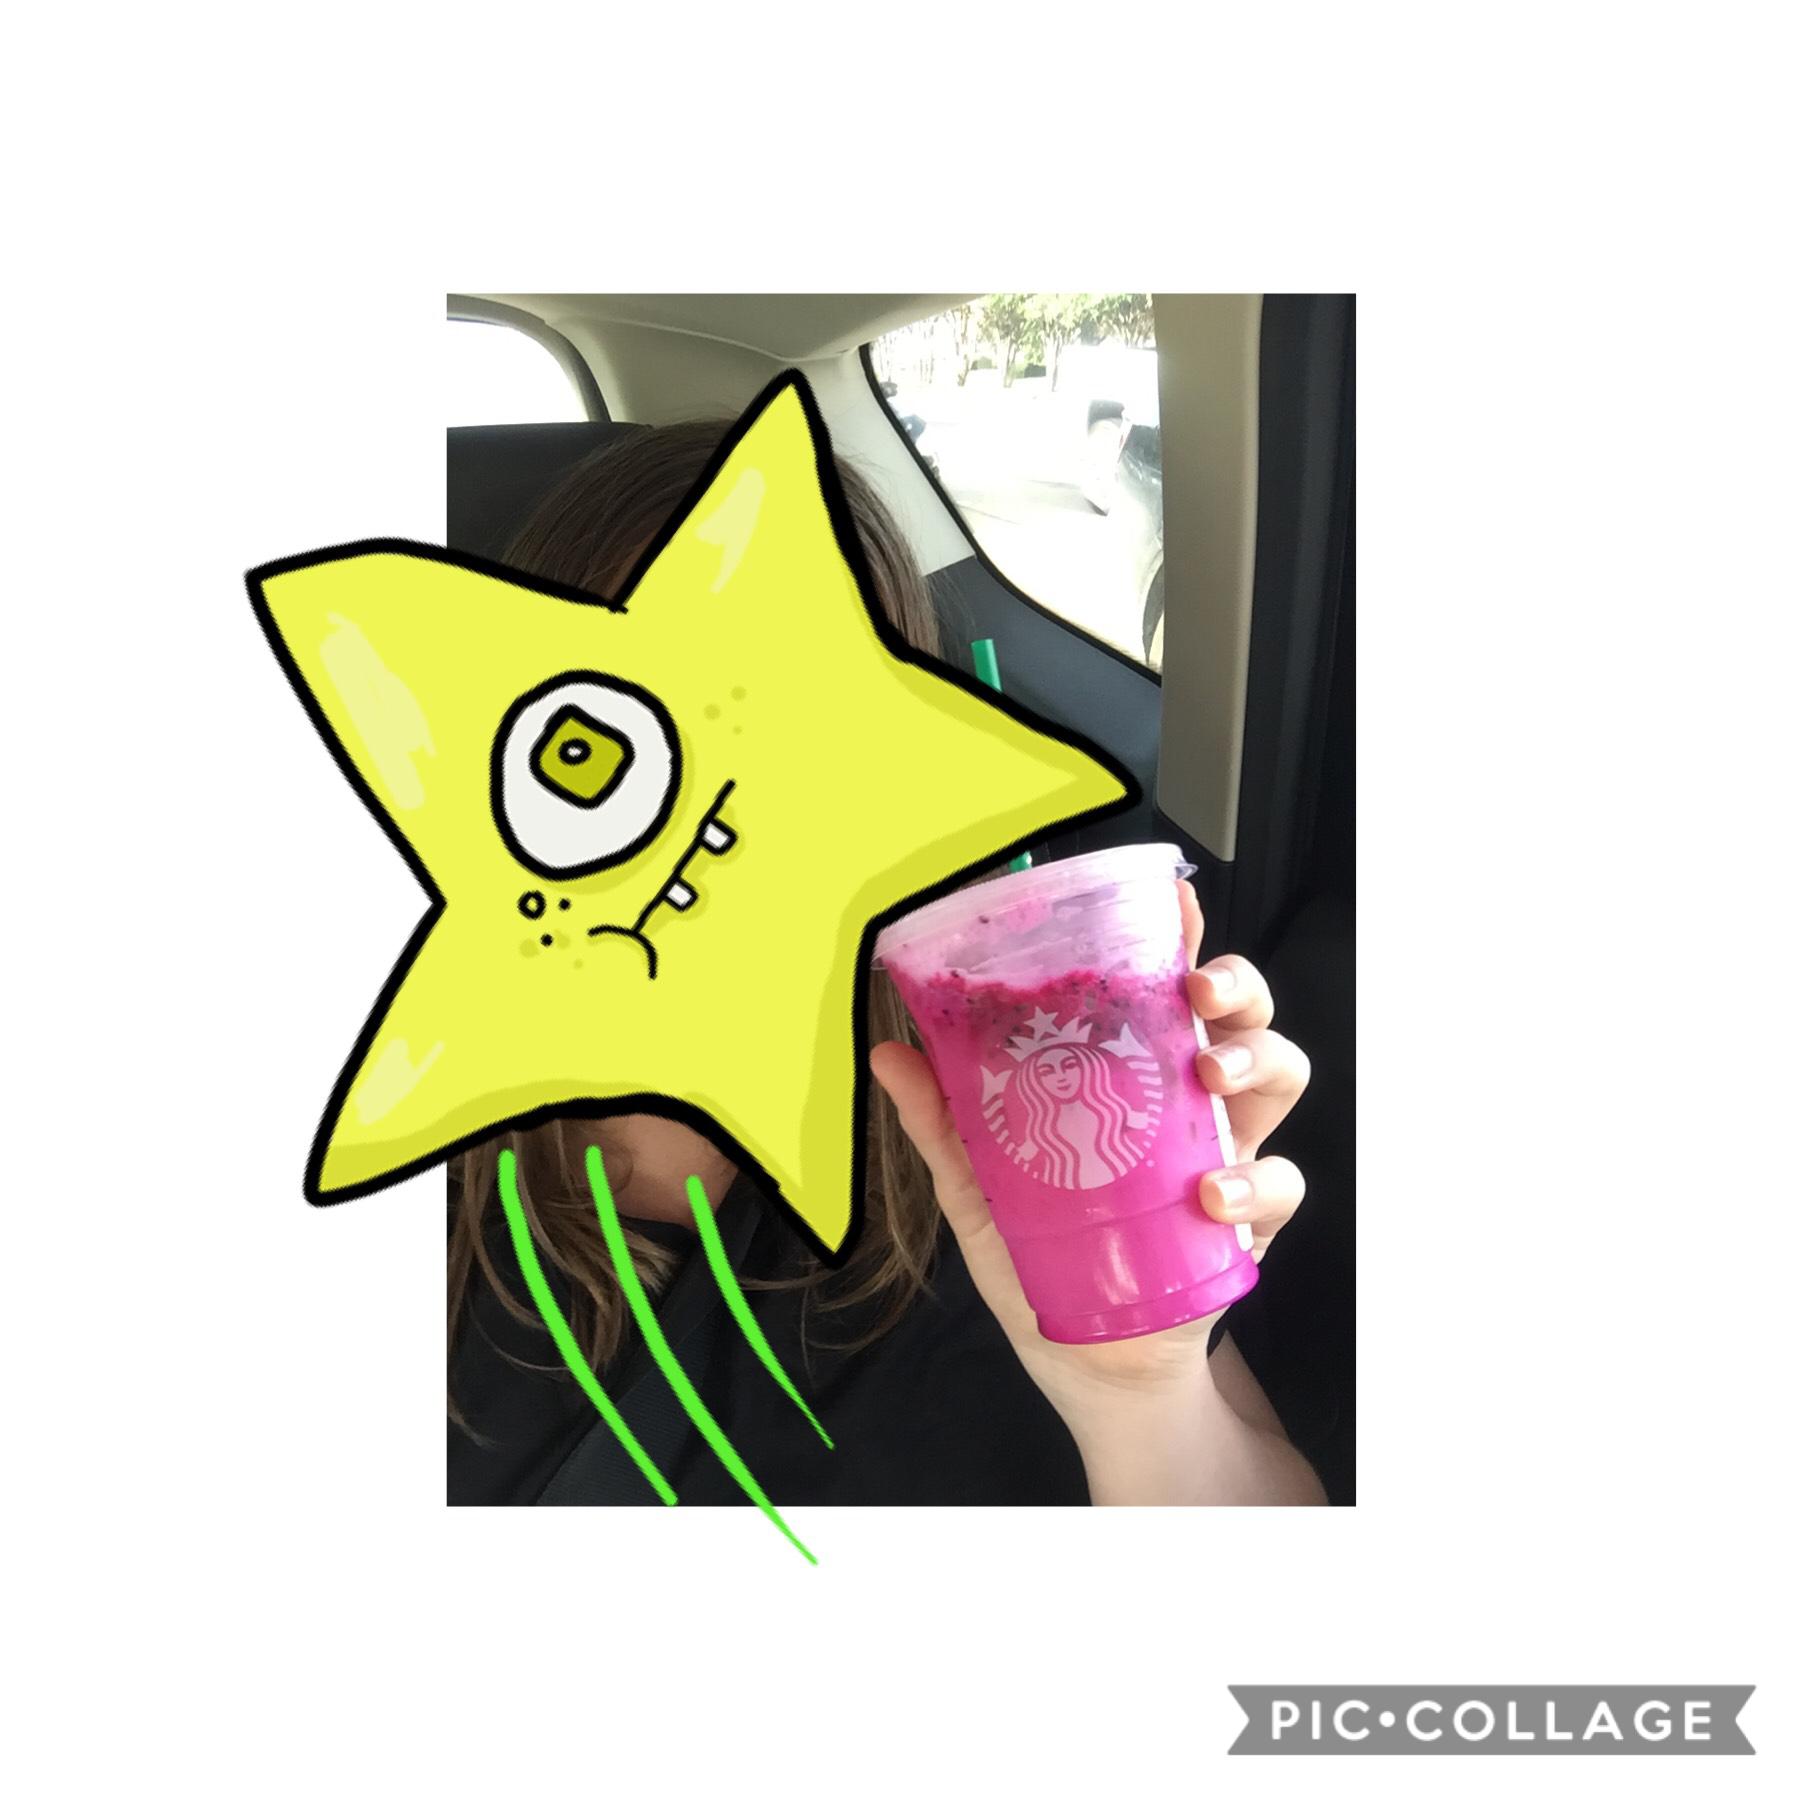 Yesterday I got the dragon fruit drink at Starbucks! Its delicious 😋 